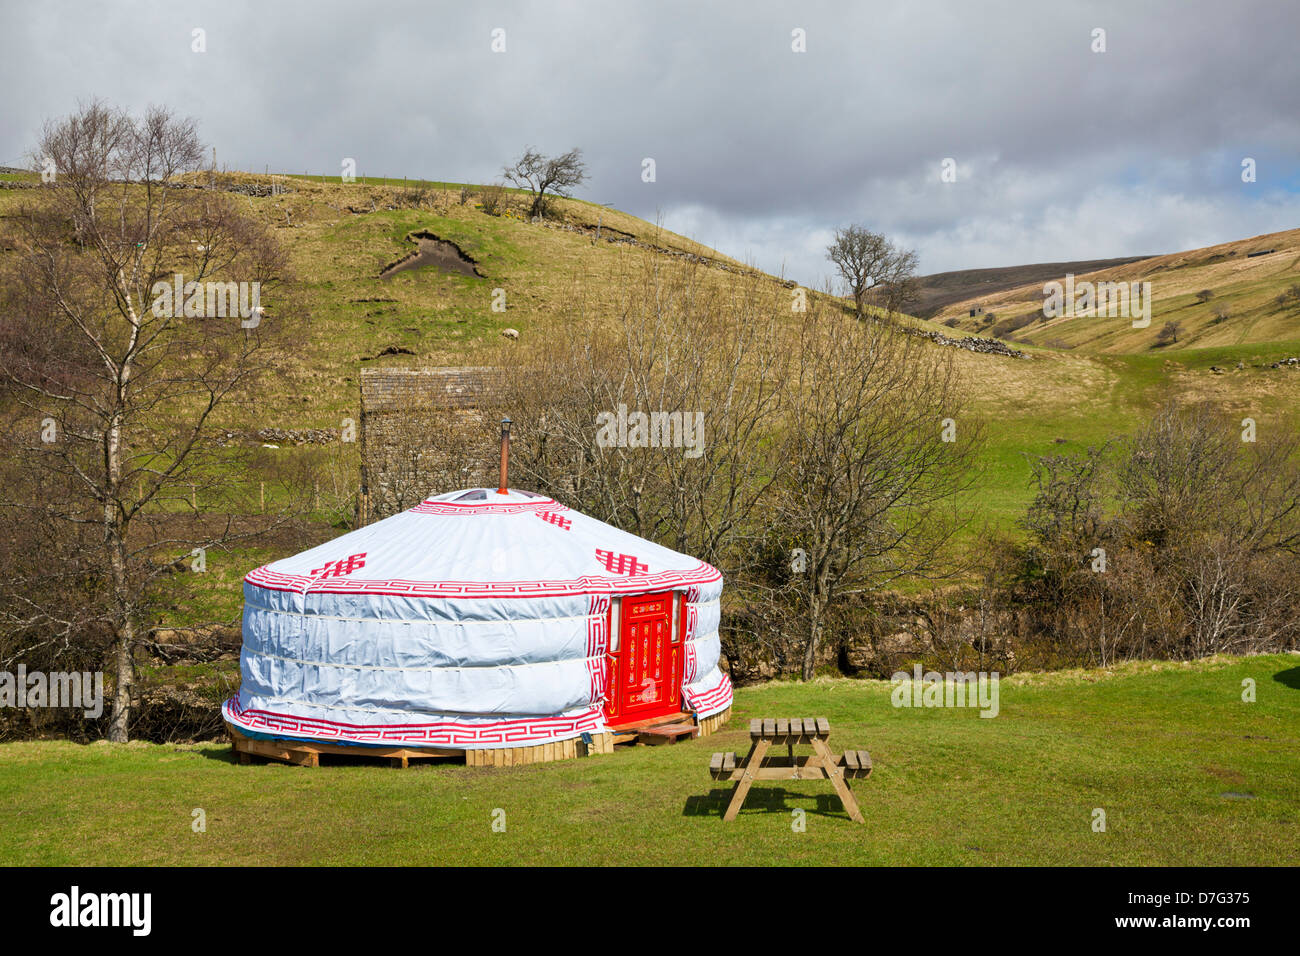 Yurt  tent for camping in the village of Keld in the Yorkshire Dales National Park England UK GB EU Europe Stock Photo